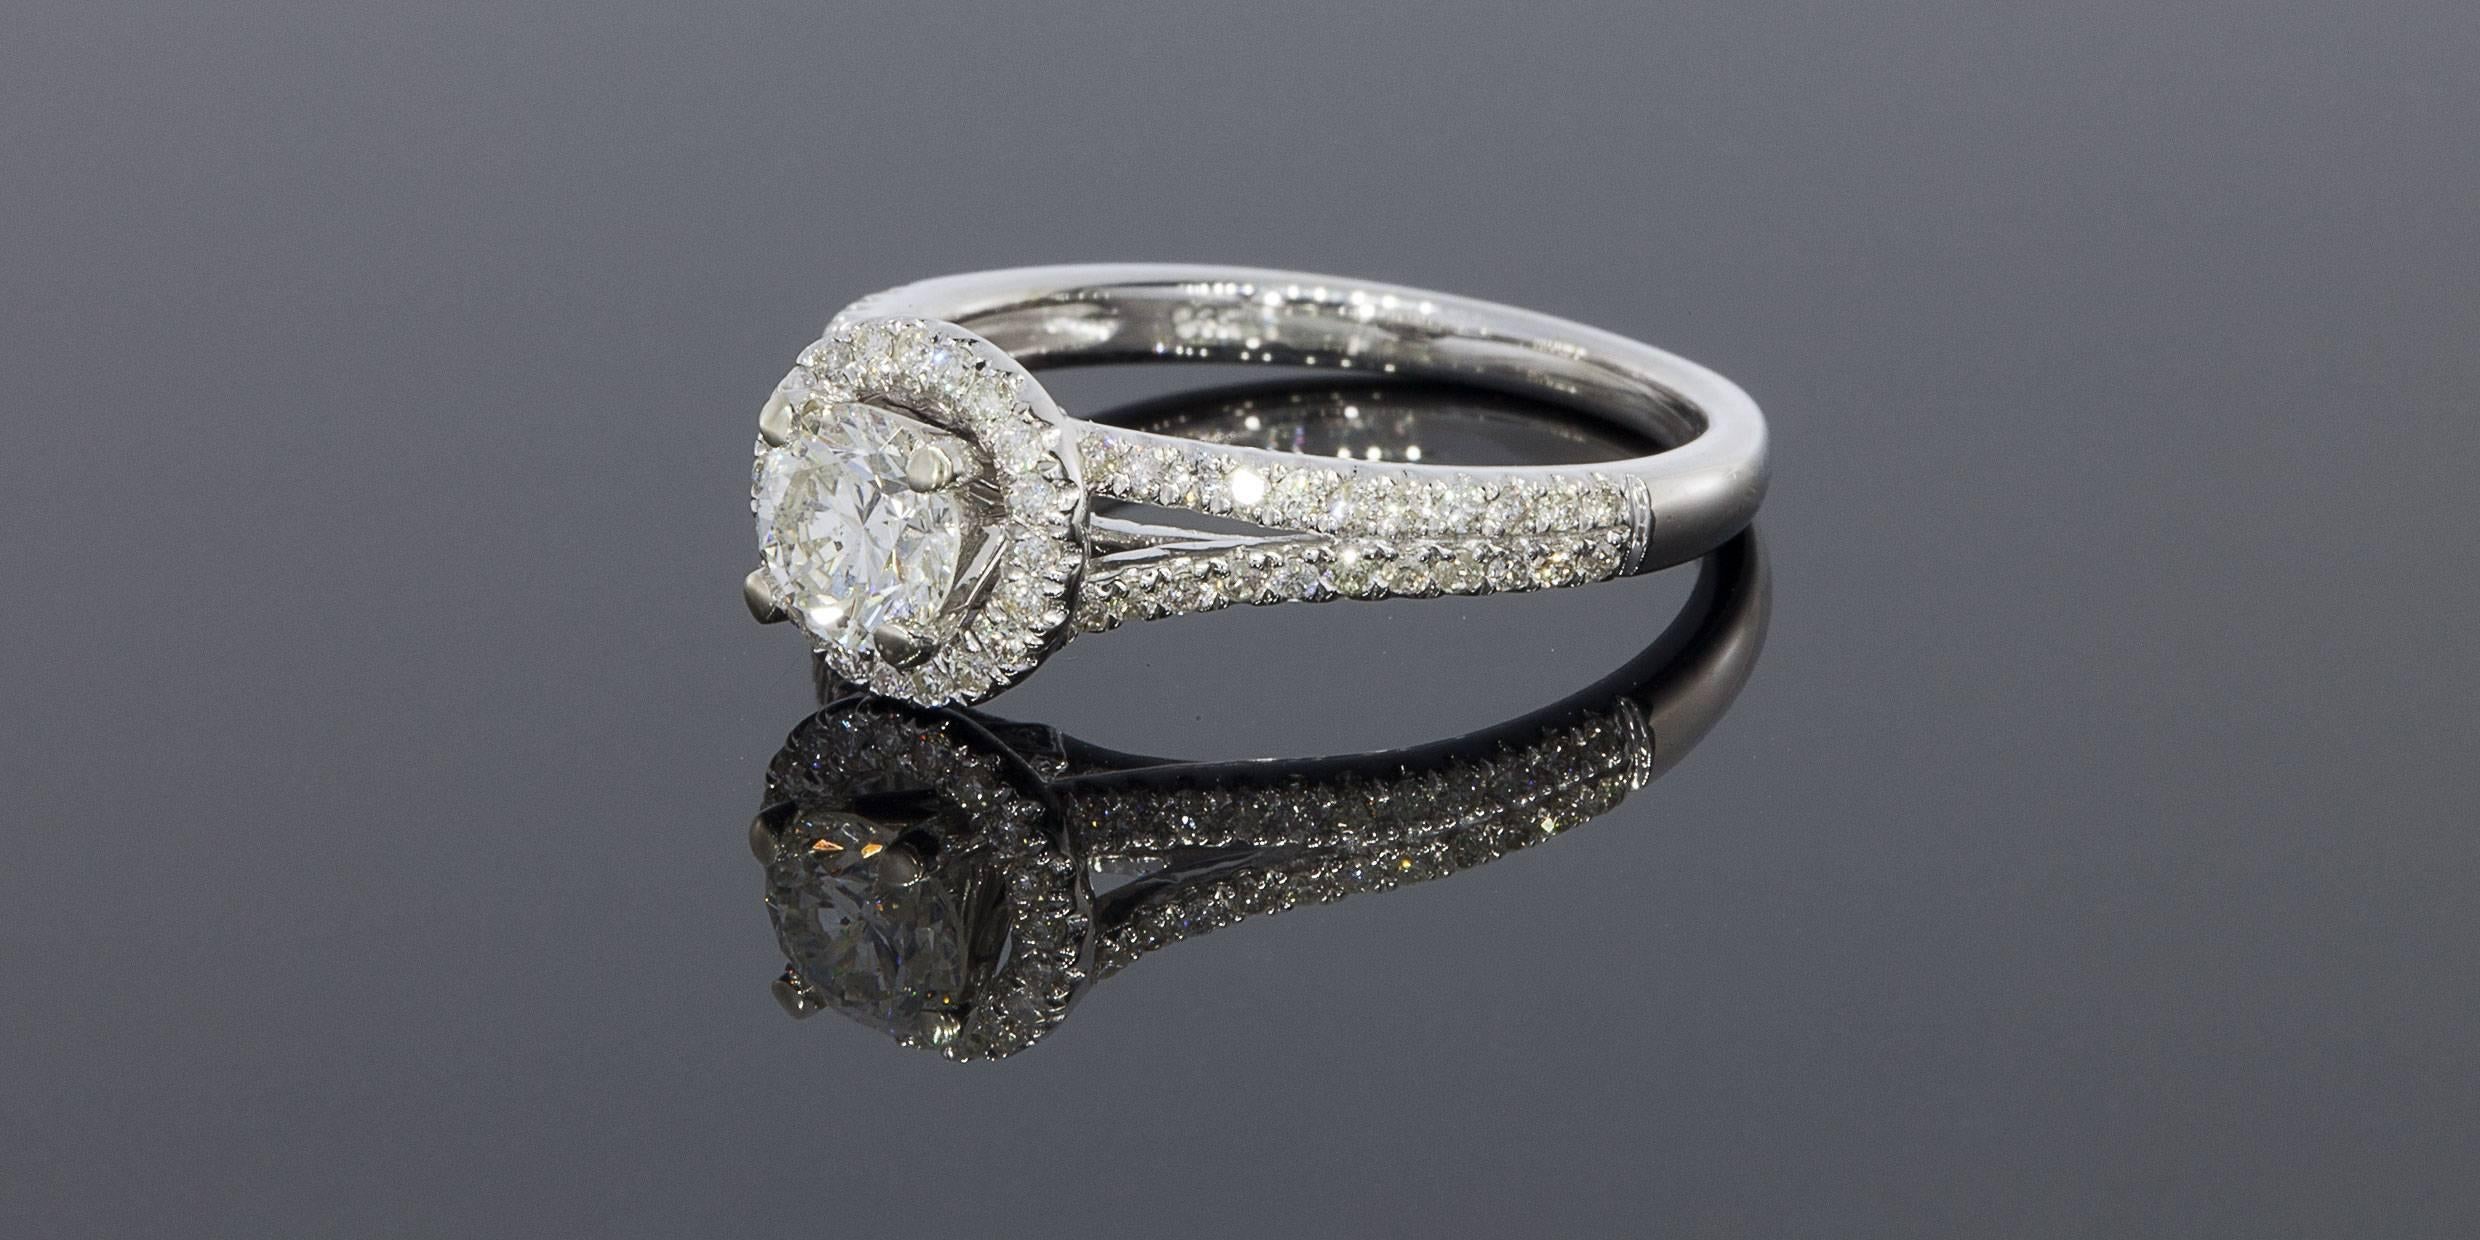 This gorgeous ring sparkles beautifully. It features a .56 carat round brilliant diamond center that grades as J/SI2 in quality according to GIA standards. This glittering center diamond is surrounded by a beautiful pave set halo of diamonds. The